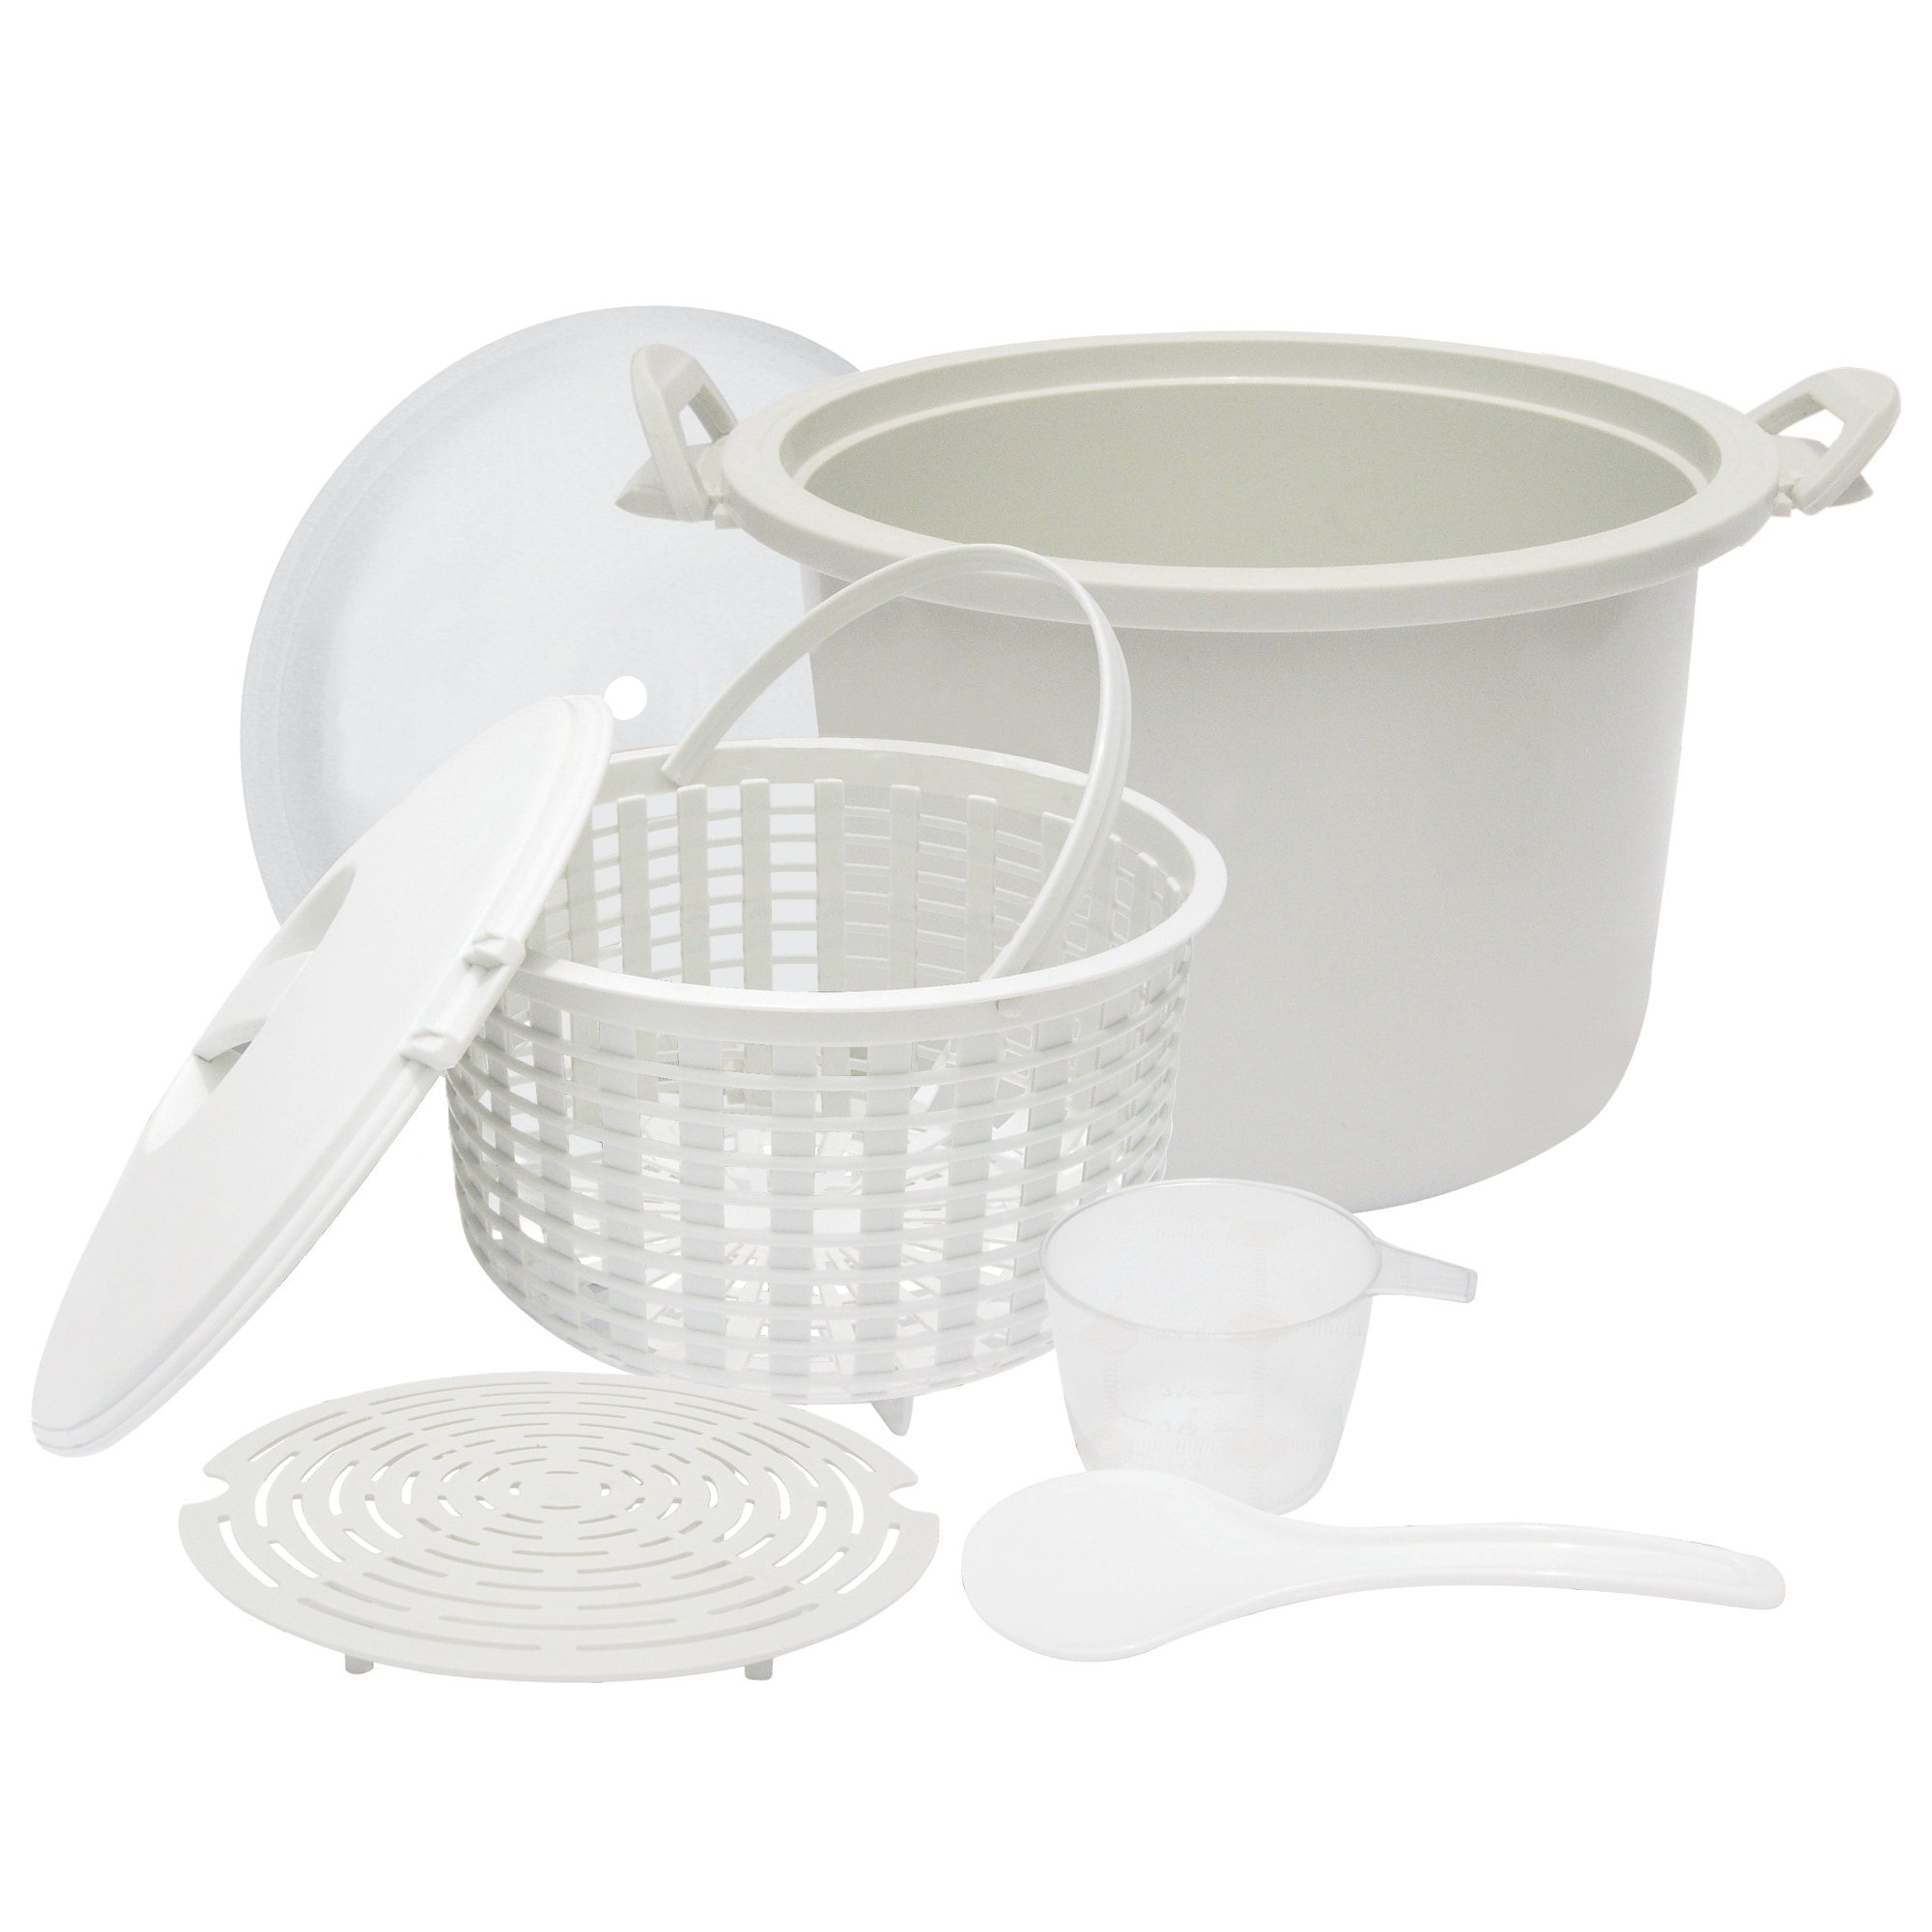 Bene Casa microwave steamer, automatic draining steamer, microwave pasta  cooker, - On Sale - Bed Bath & Beyond - 33030936